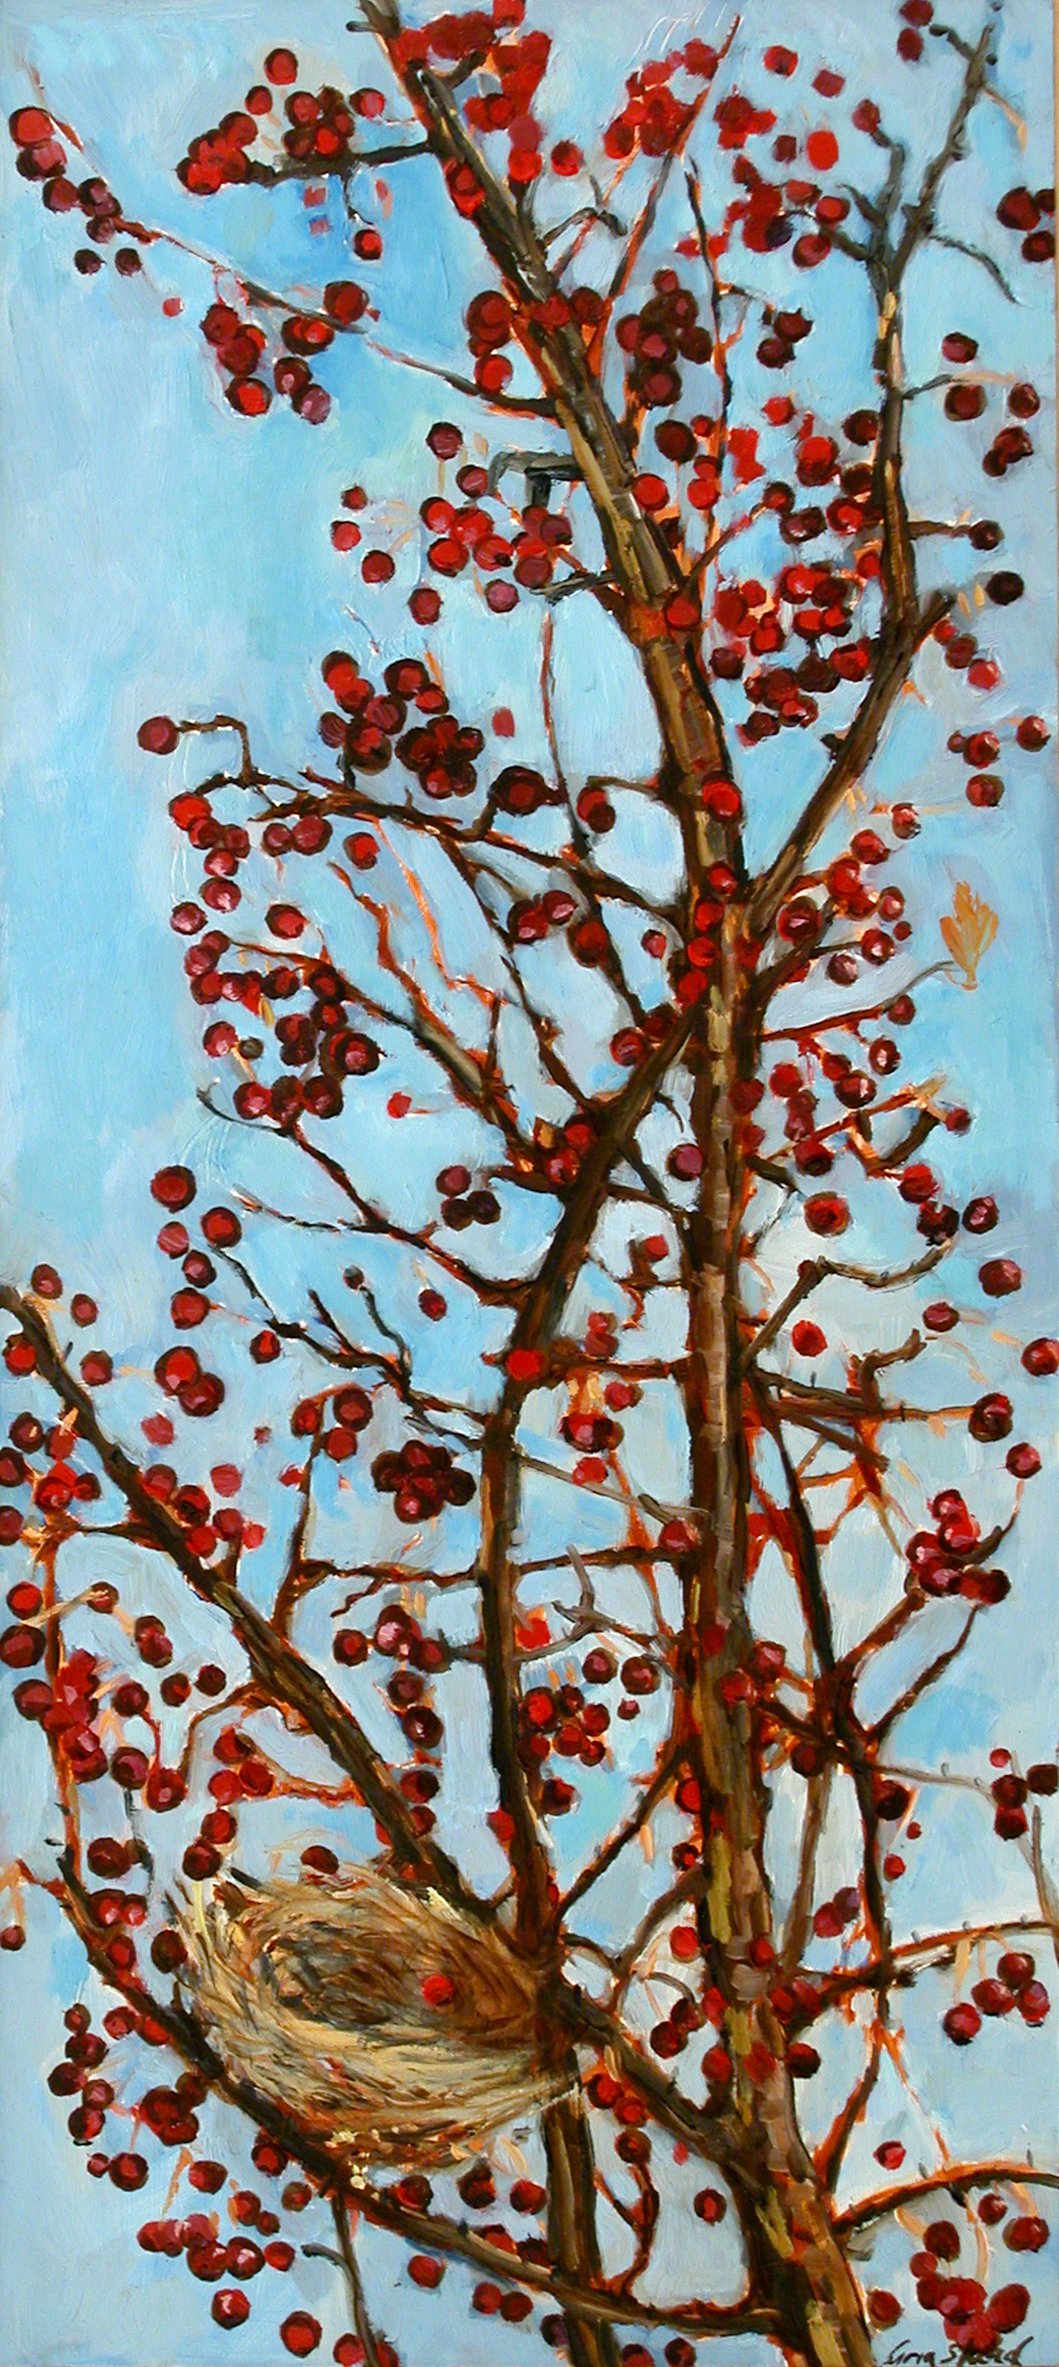 Untitled (hawthorn berries and nest).jpg